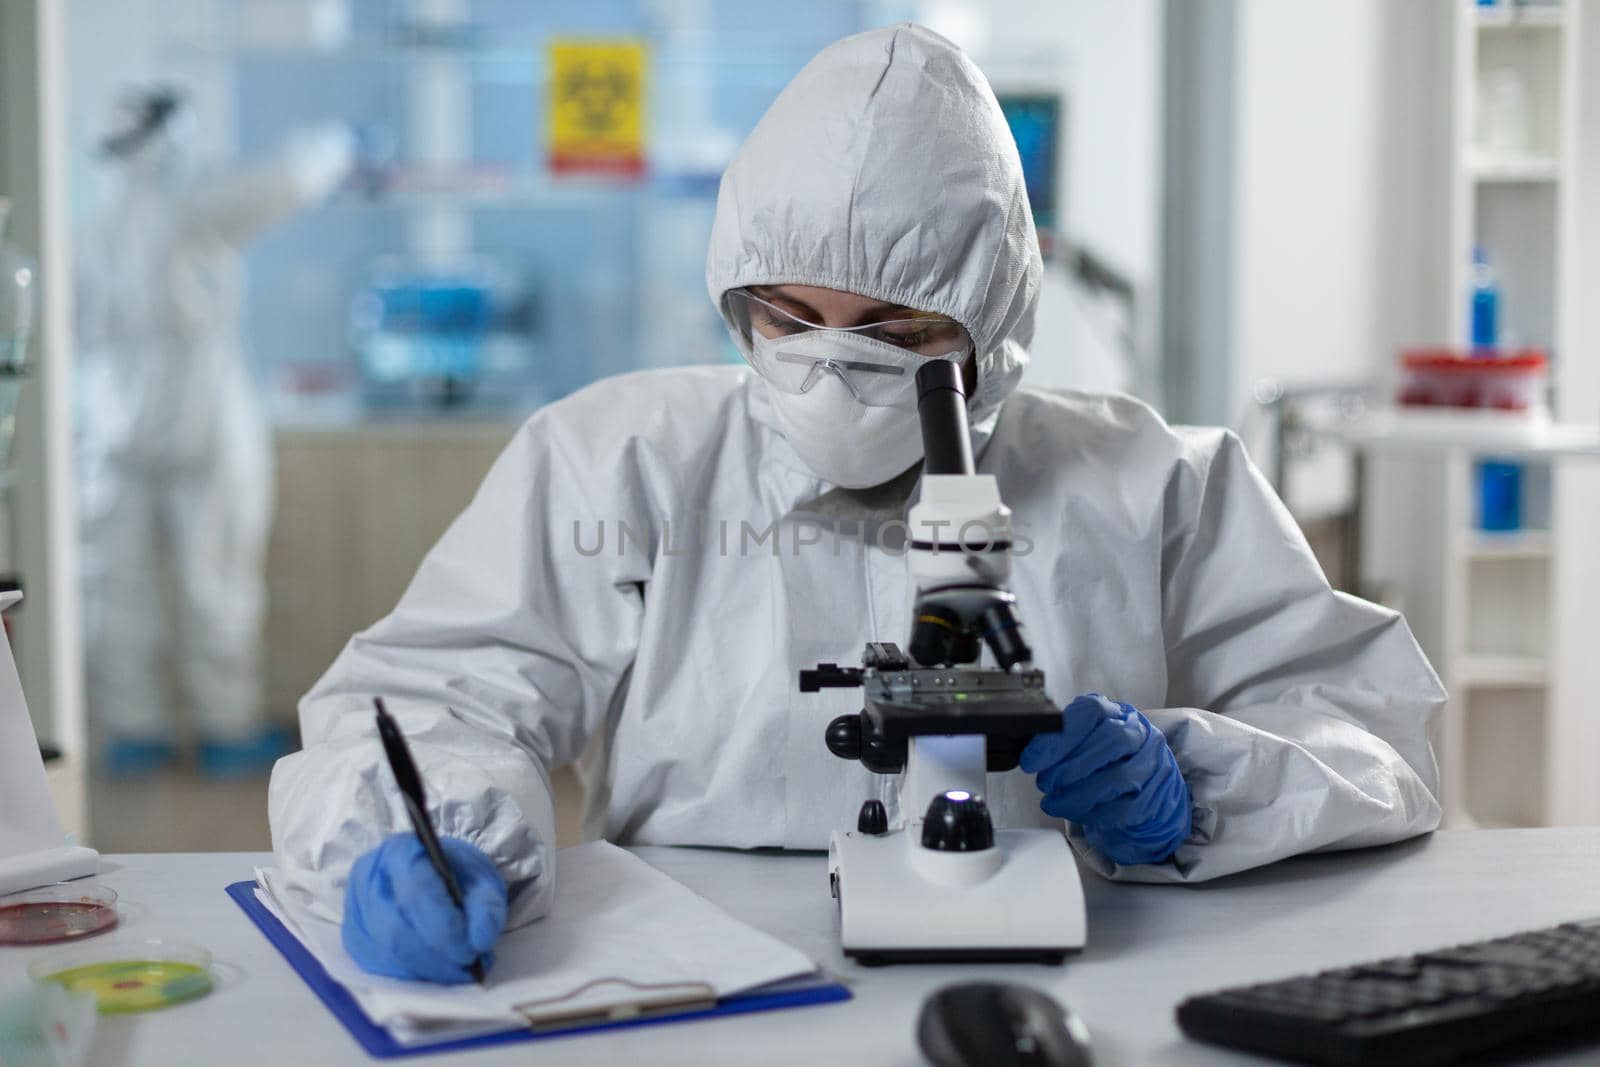 Biologist researcher wearing protective suit analyzing chemicals using medical microscope while writing clinical expertise during scientific experiment. Specialist doctor working in biochemistry lab